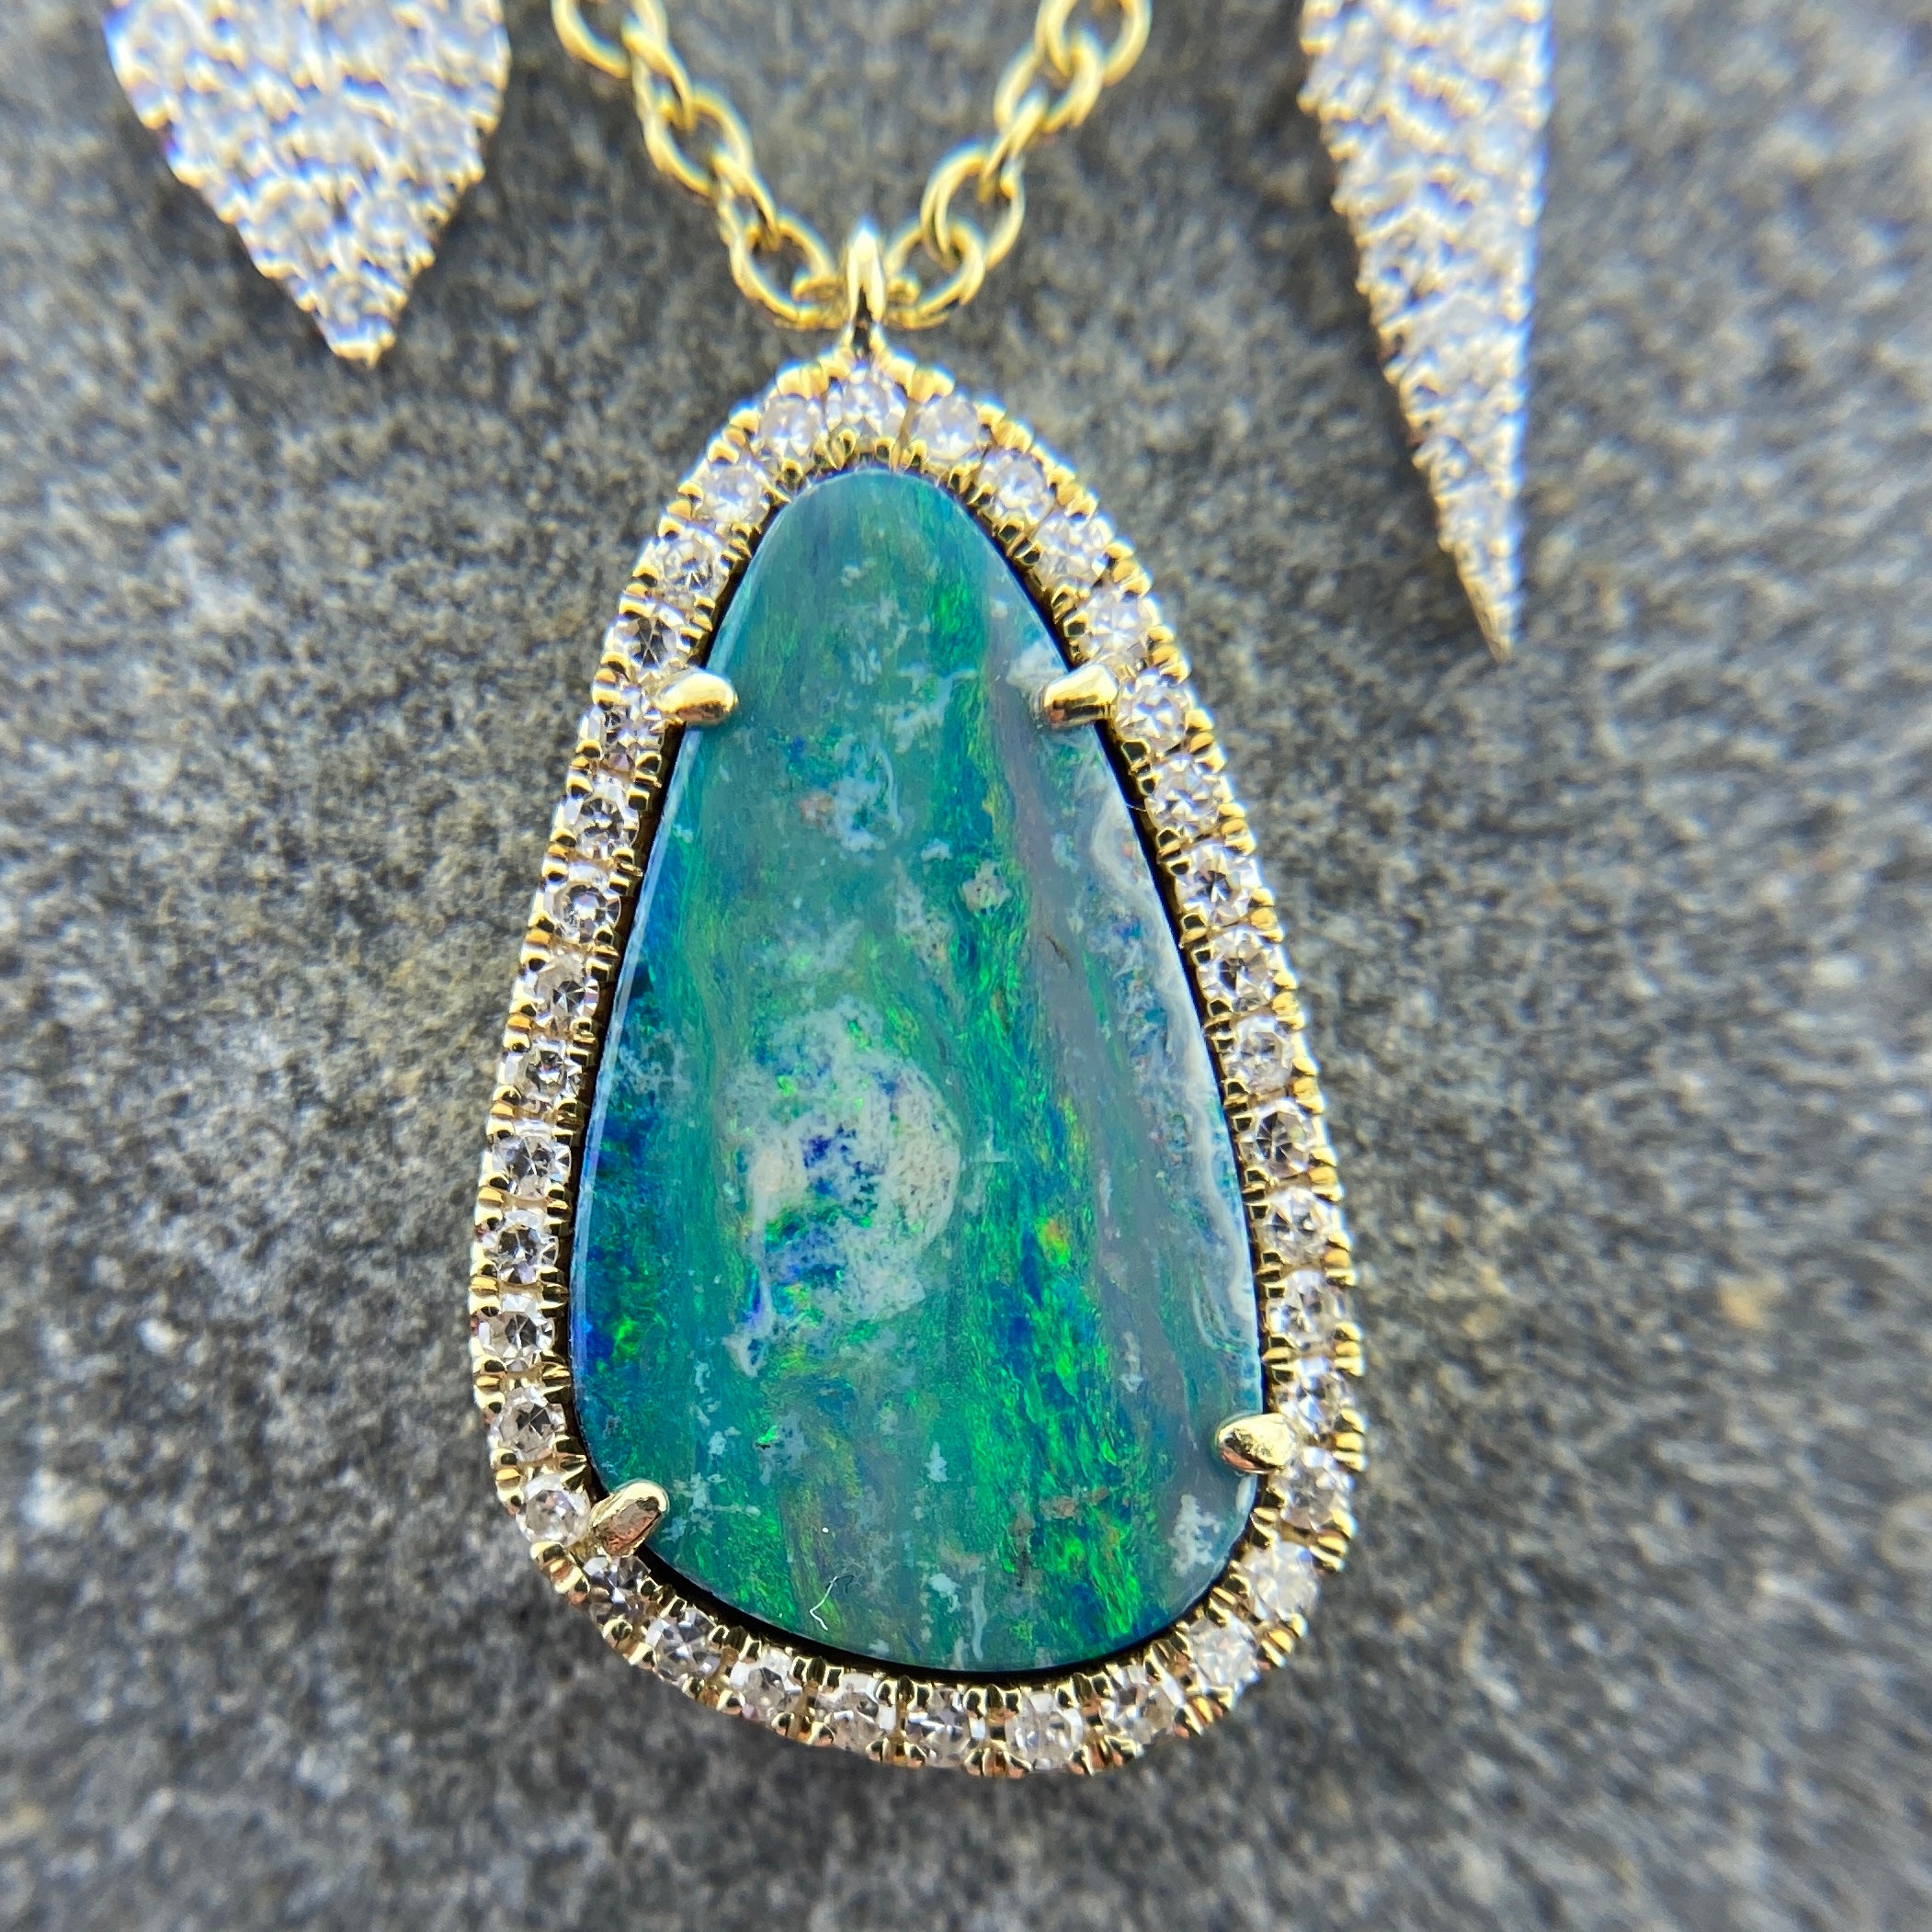 Parle Yellow Gold Calibrated Light Opal Necklace NCO142N12CI | Arthur's  Jewelry | Bedford, VA